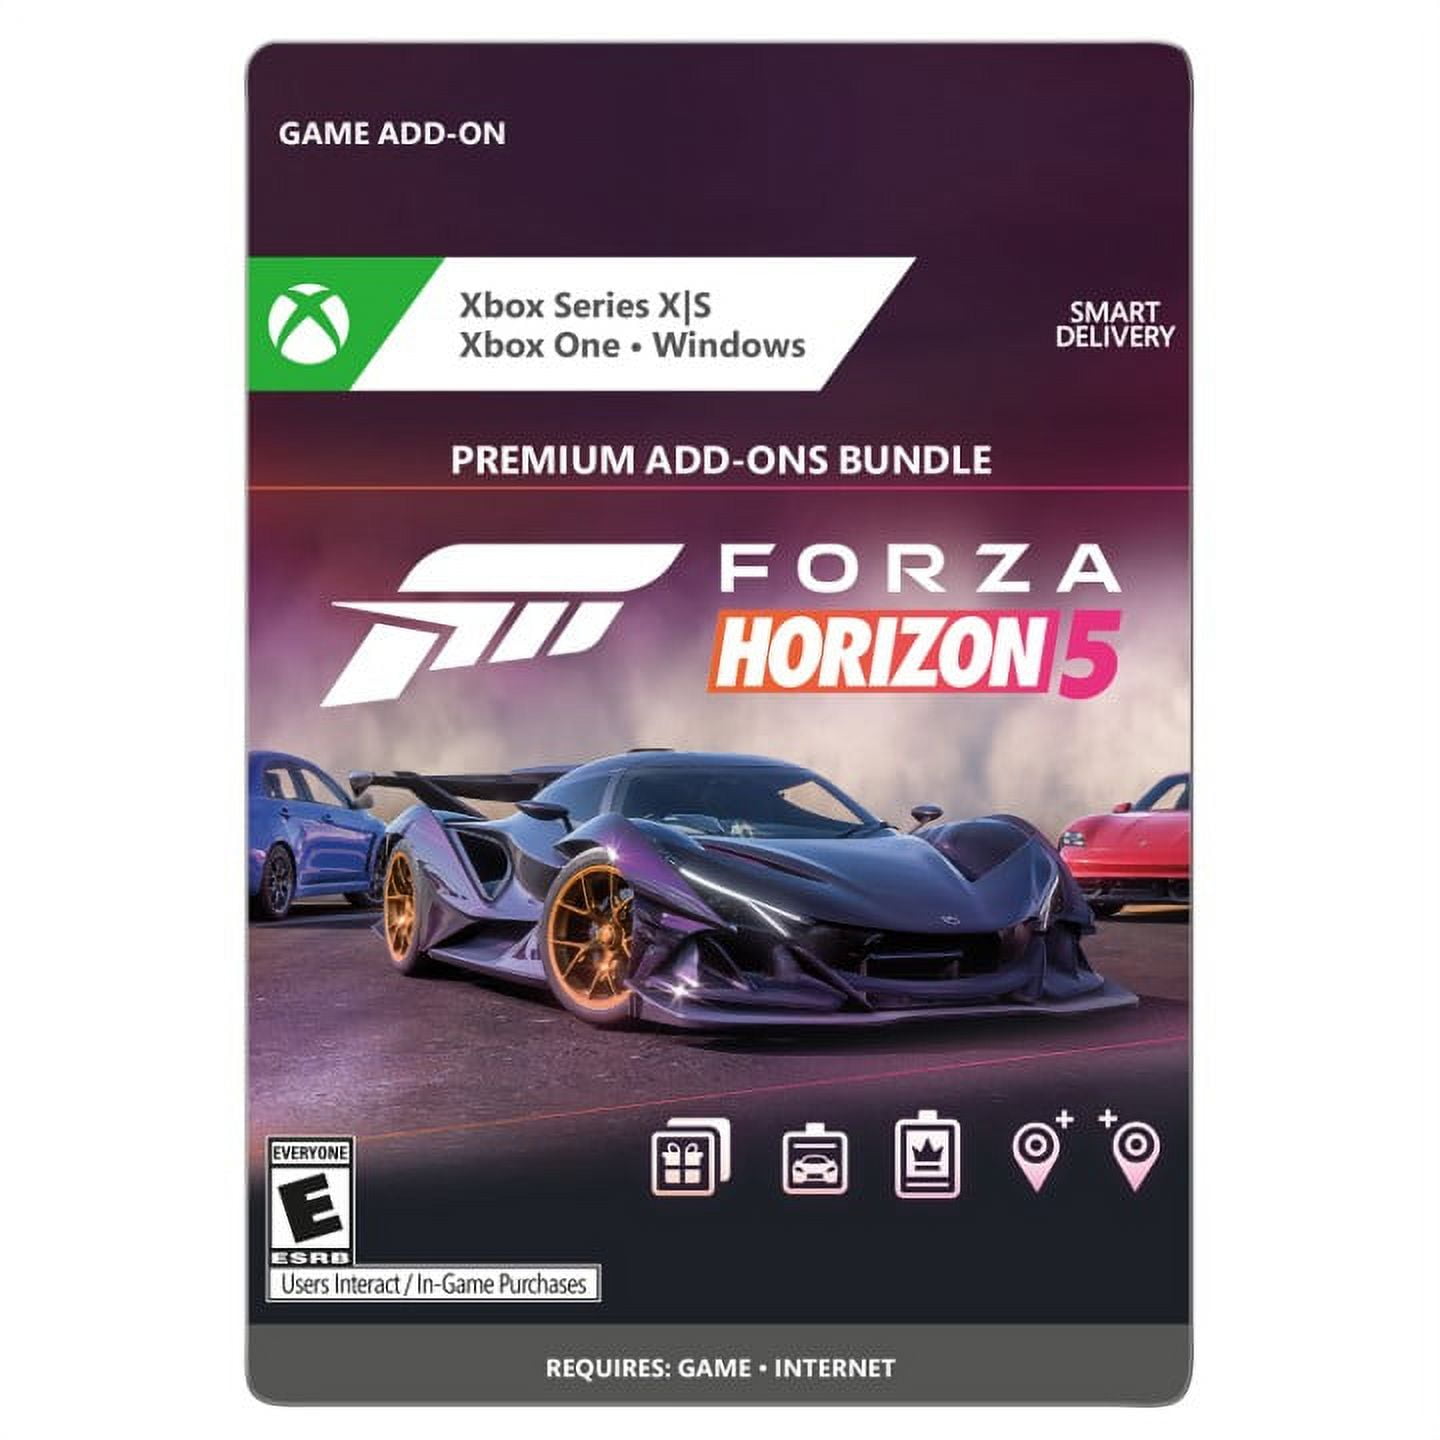 Forza Horizon 5 - Deluxe Edition (Xbox One / Series X|S Download Code)